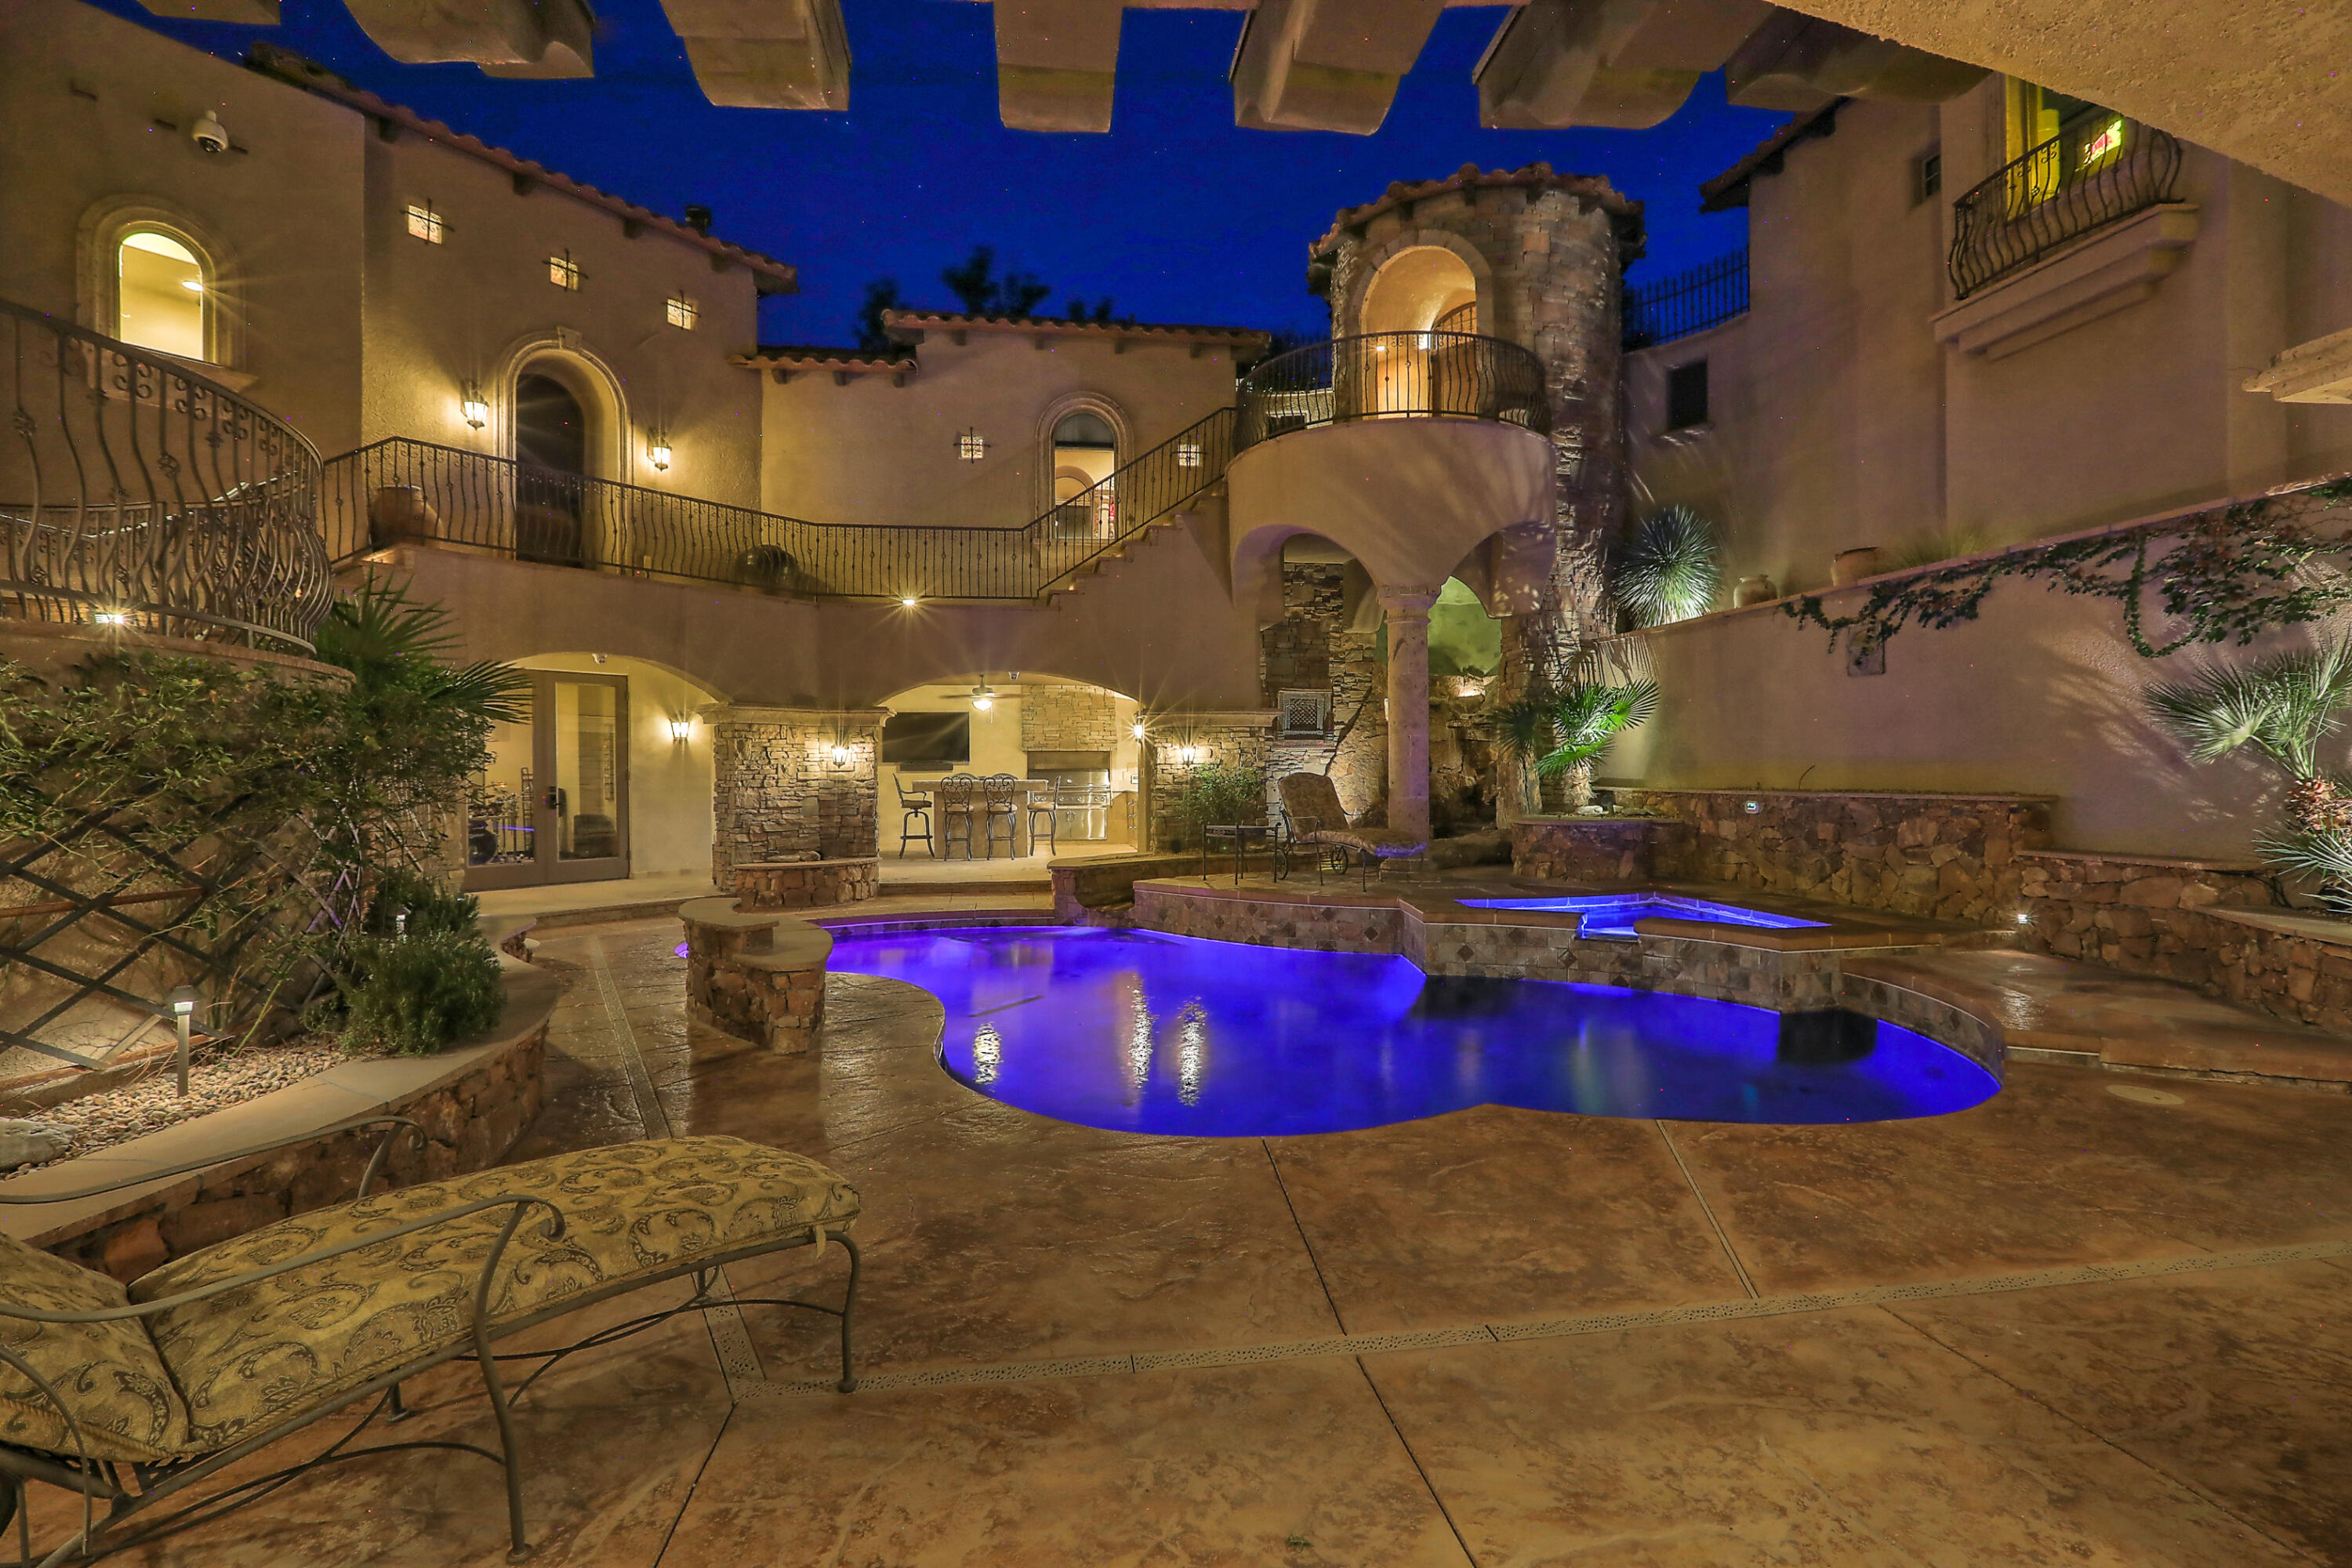 Stunning Tuscan villa a stone's throw from the Rio Grande, fine dining & recreation. Over 7,000 square feet of luxury w/every amenity & convenience included. From the marble floors to the mosaic tiled & wood beam ceiling, this home is your retreat. The gourmet chef's kitchen boasts top-of-theline appliances, pot filler, custom tile, dual sinks, breakfast nook w/a breathtaking view, & enough space to entertain the whole neighborhood. Pool features stone waterfall, custom lighting for night swims & a wraparound balcony & terrace to enjoy every vista. Multiple covered lounge & dining spaces, hobbyist's dream garage, workout room, media & game room & spa bathrooms. Too many one-of-a-kind luxuries to list. If a private resort is what you're after, you can't miss this beautiful palazzo!